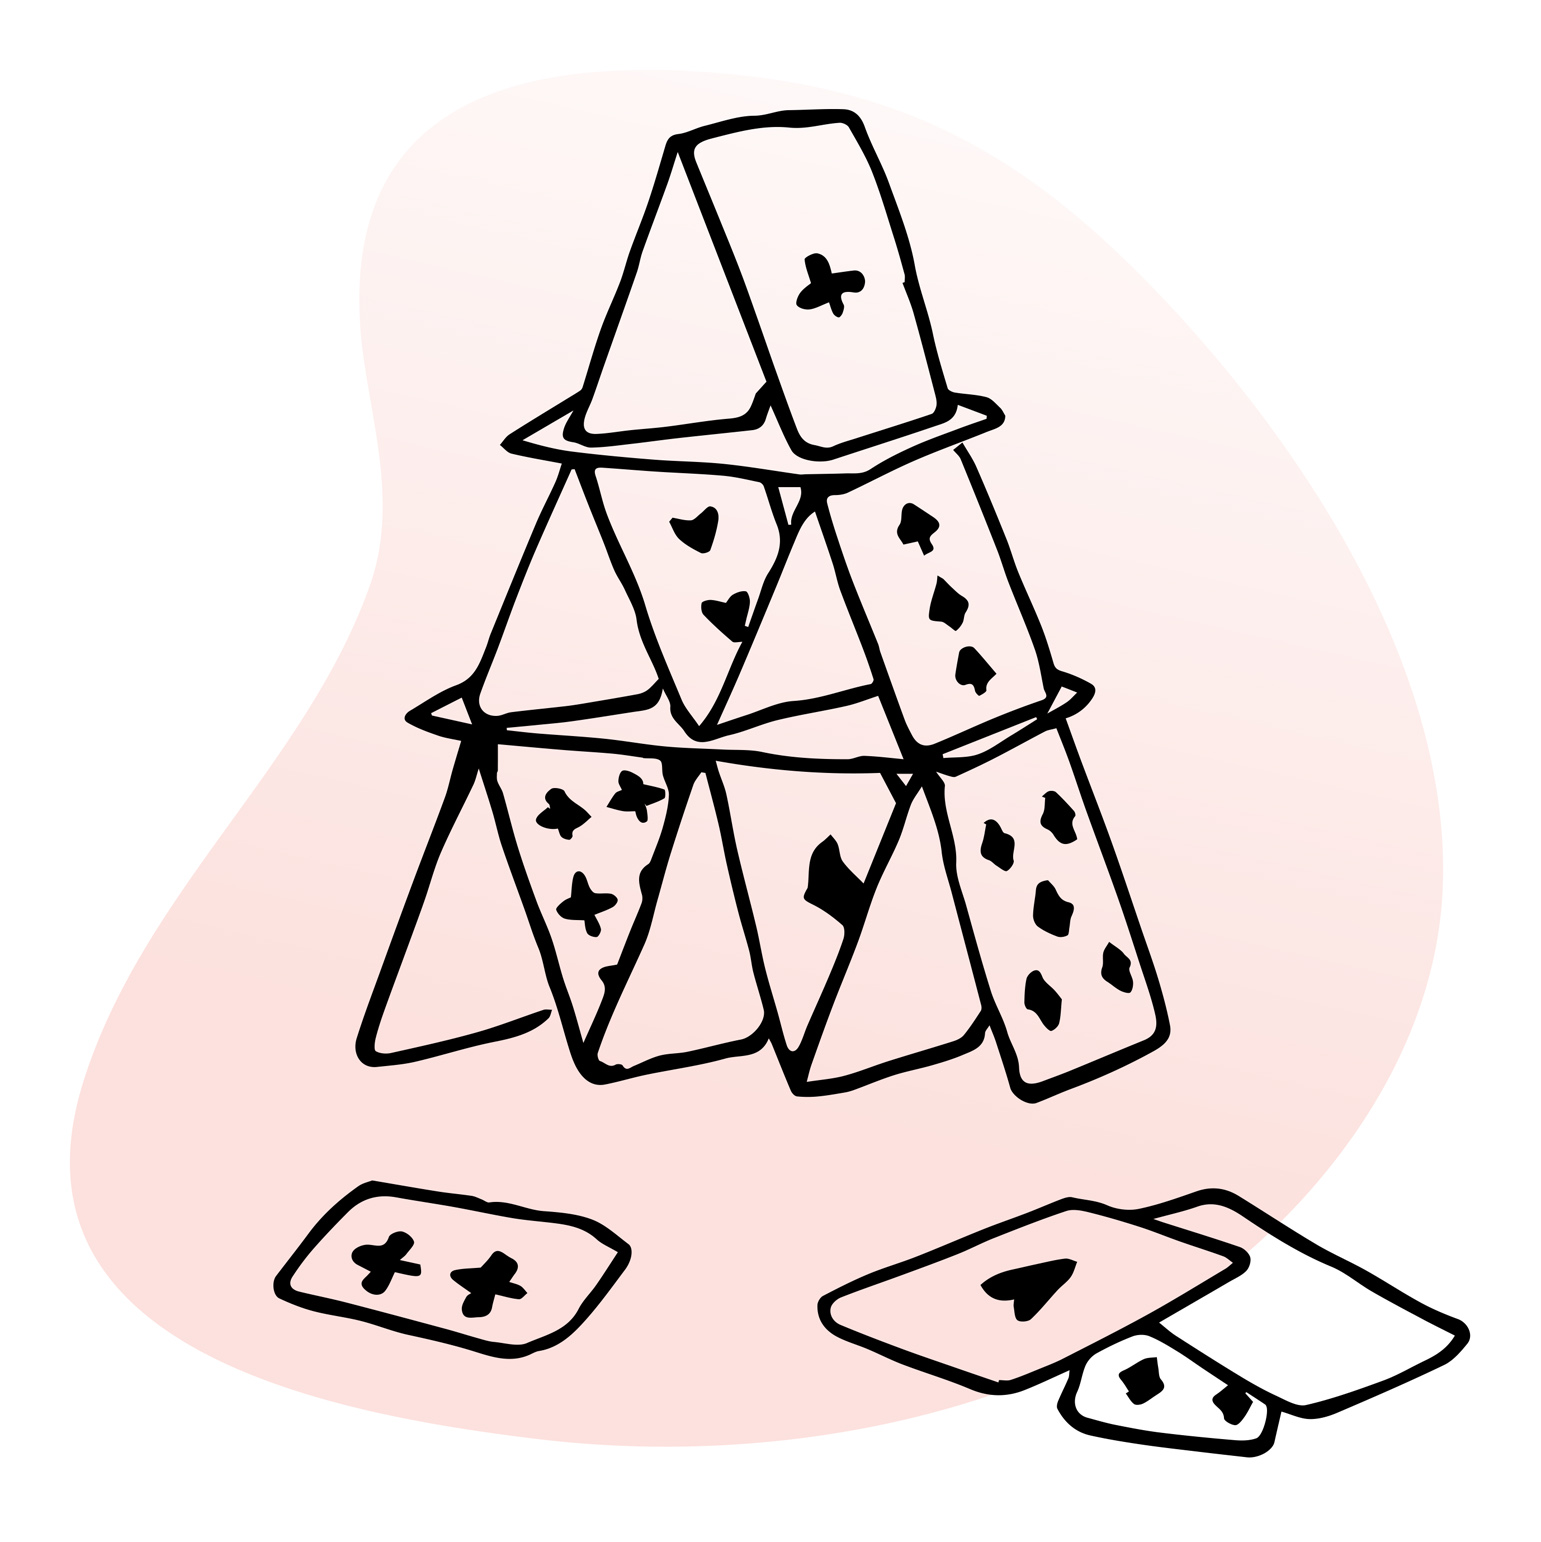 Line illustration of house of cards, with a few stray cards lying beside it